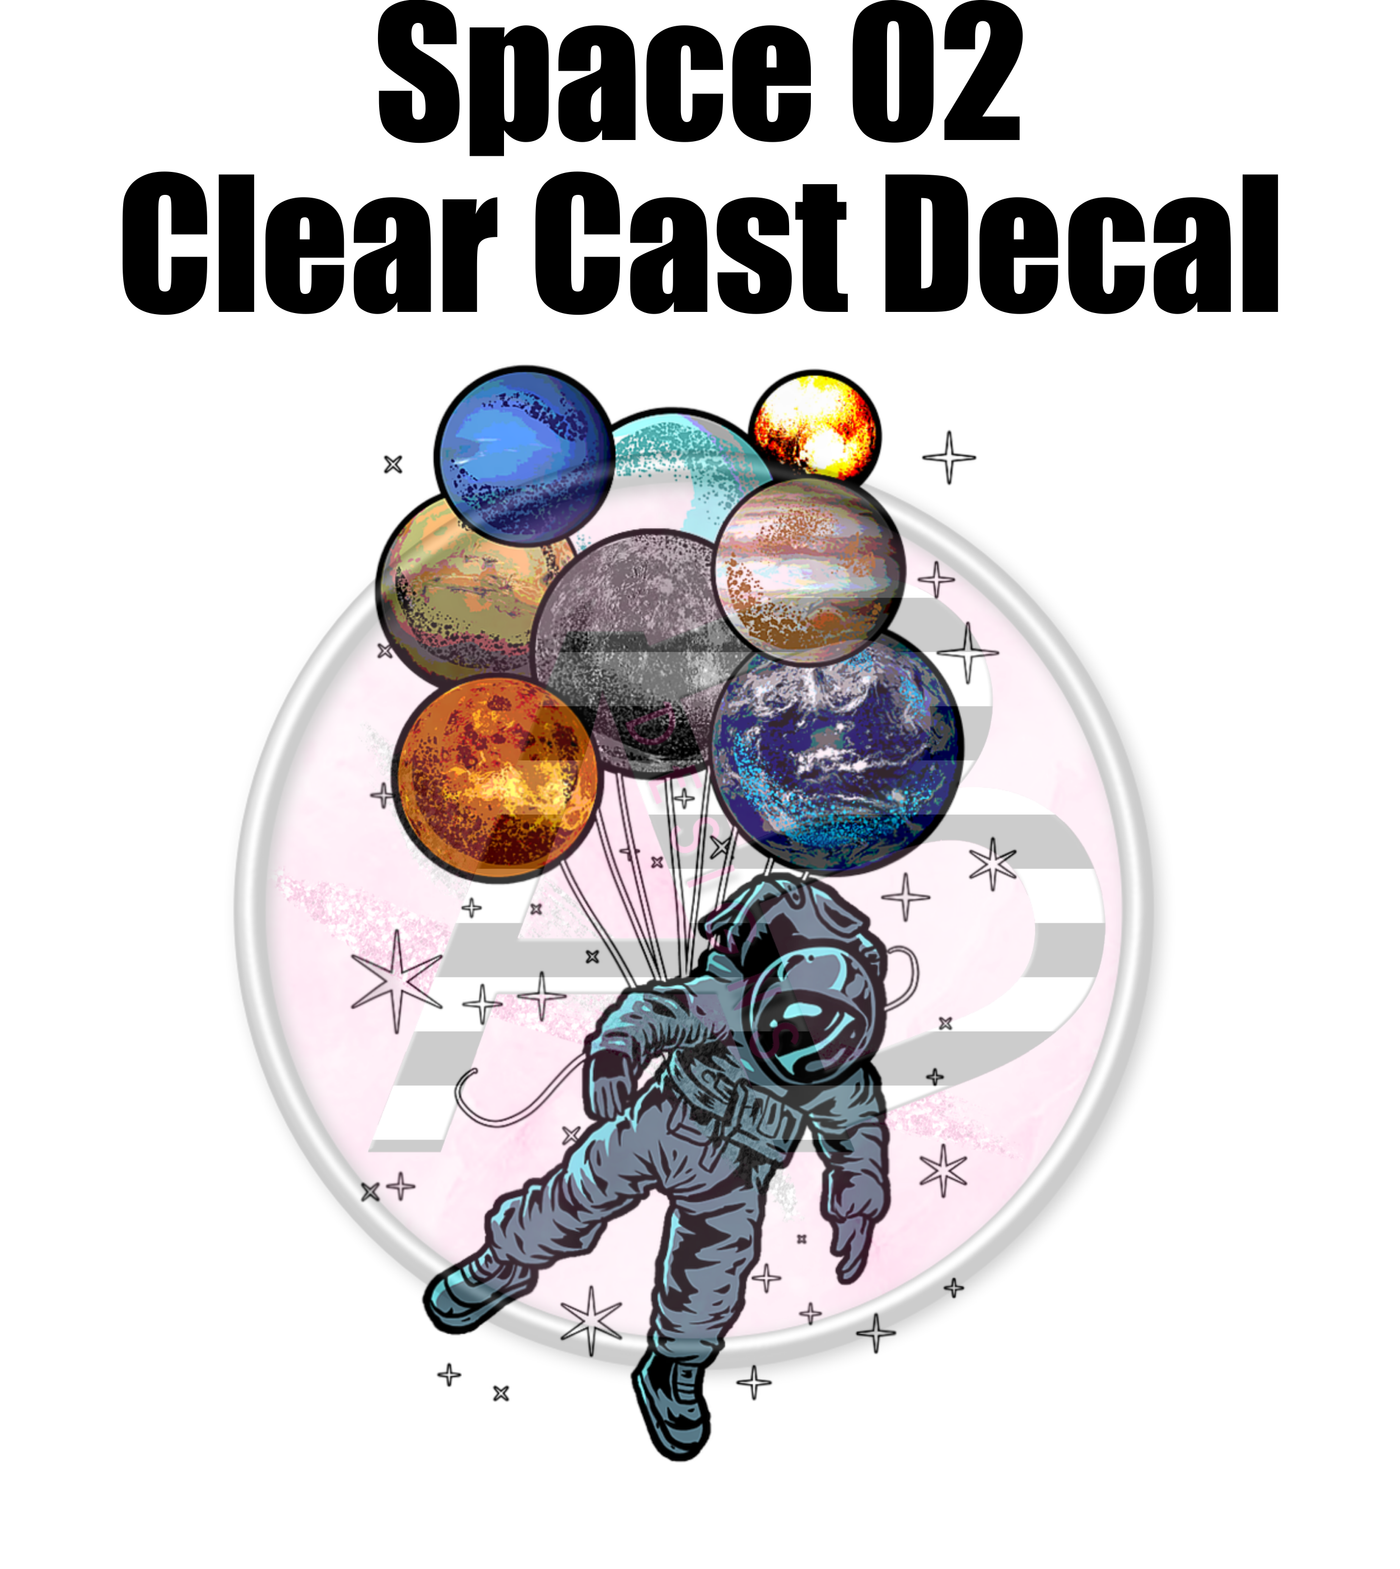 Space 02 - Clear Cast Decal